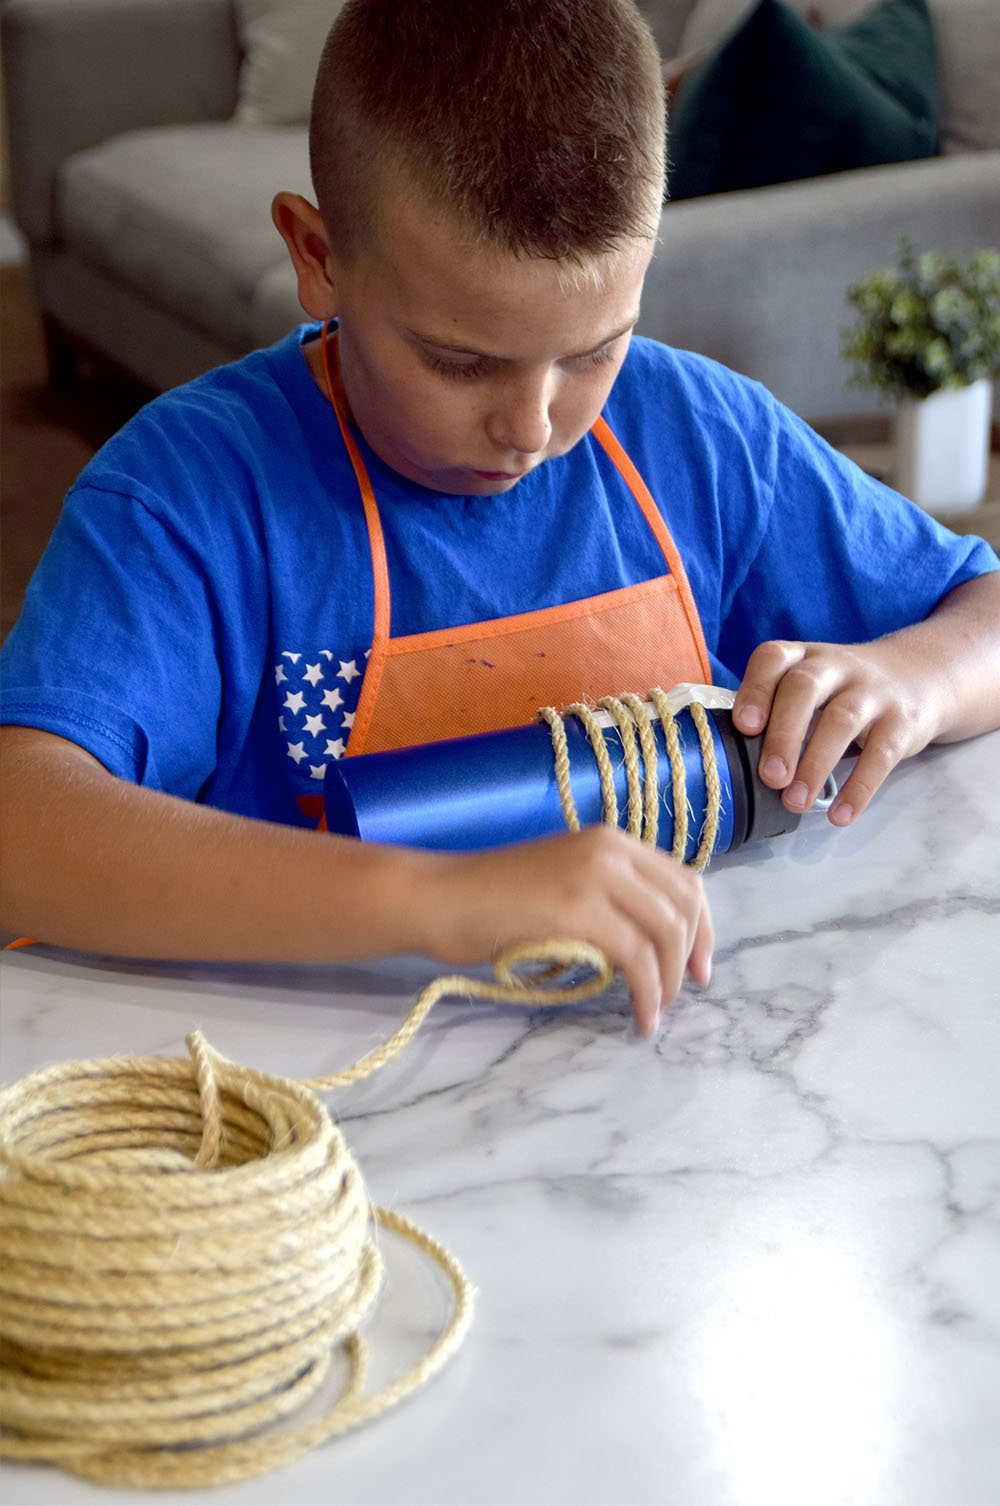 A child wrapping rope around a bottle to create bends in the rope.